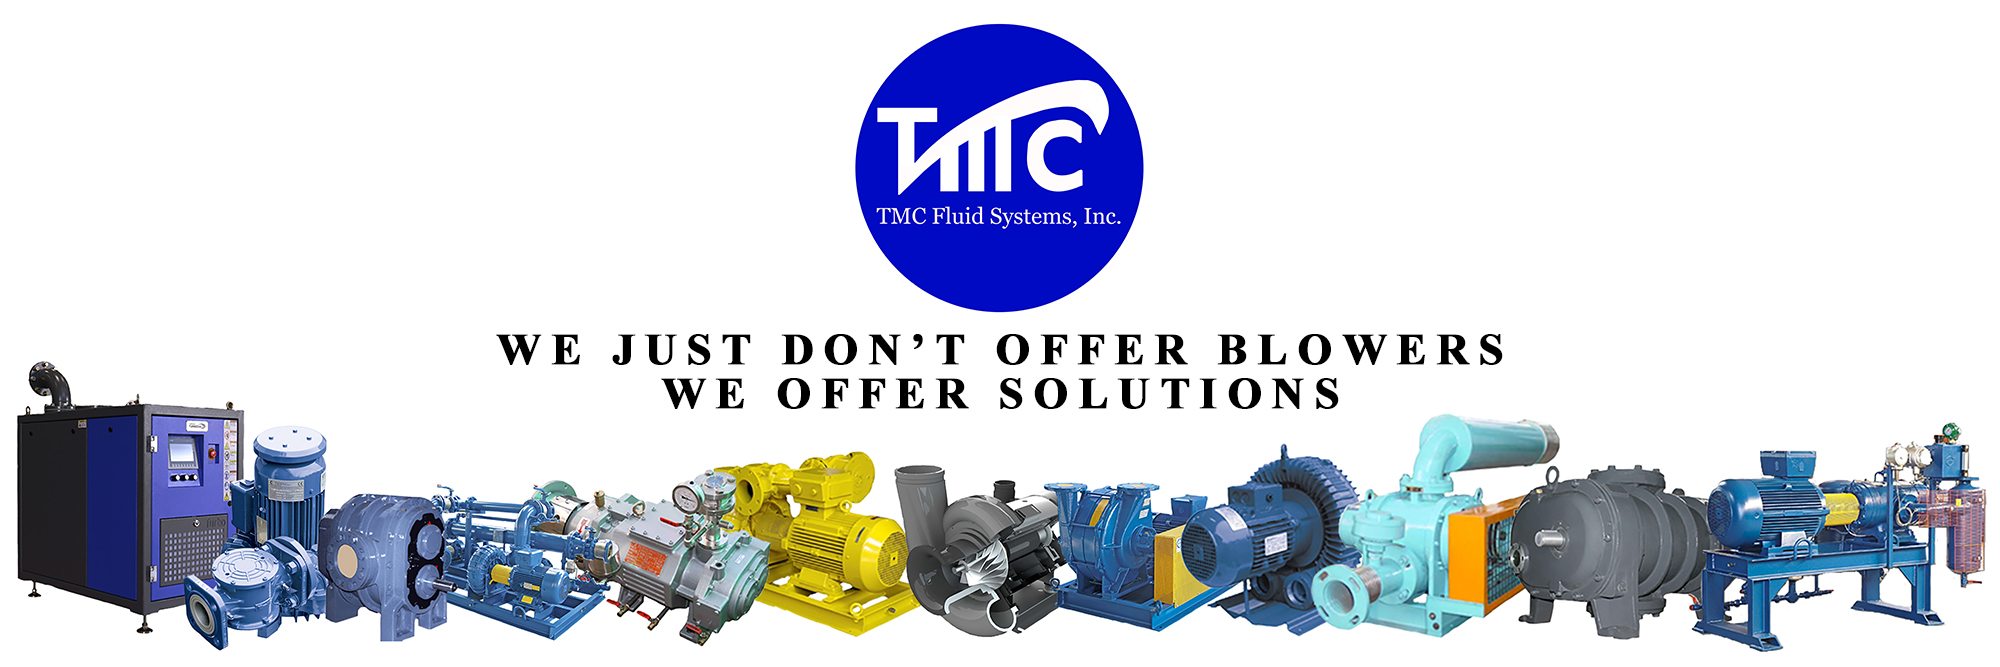 A Compete Range of Blowers and Dry Screw Vacuum Pumps